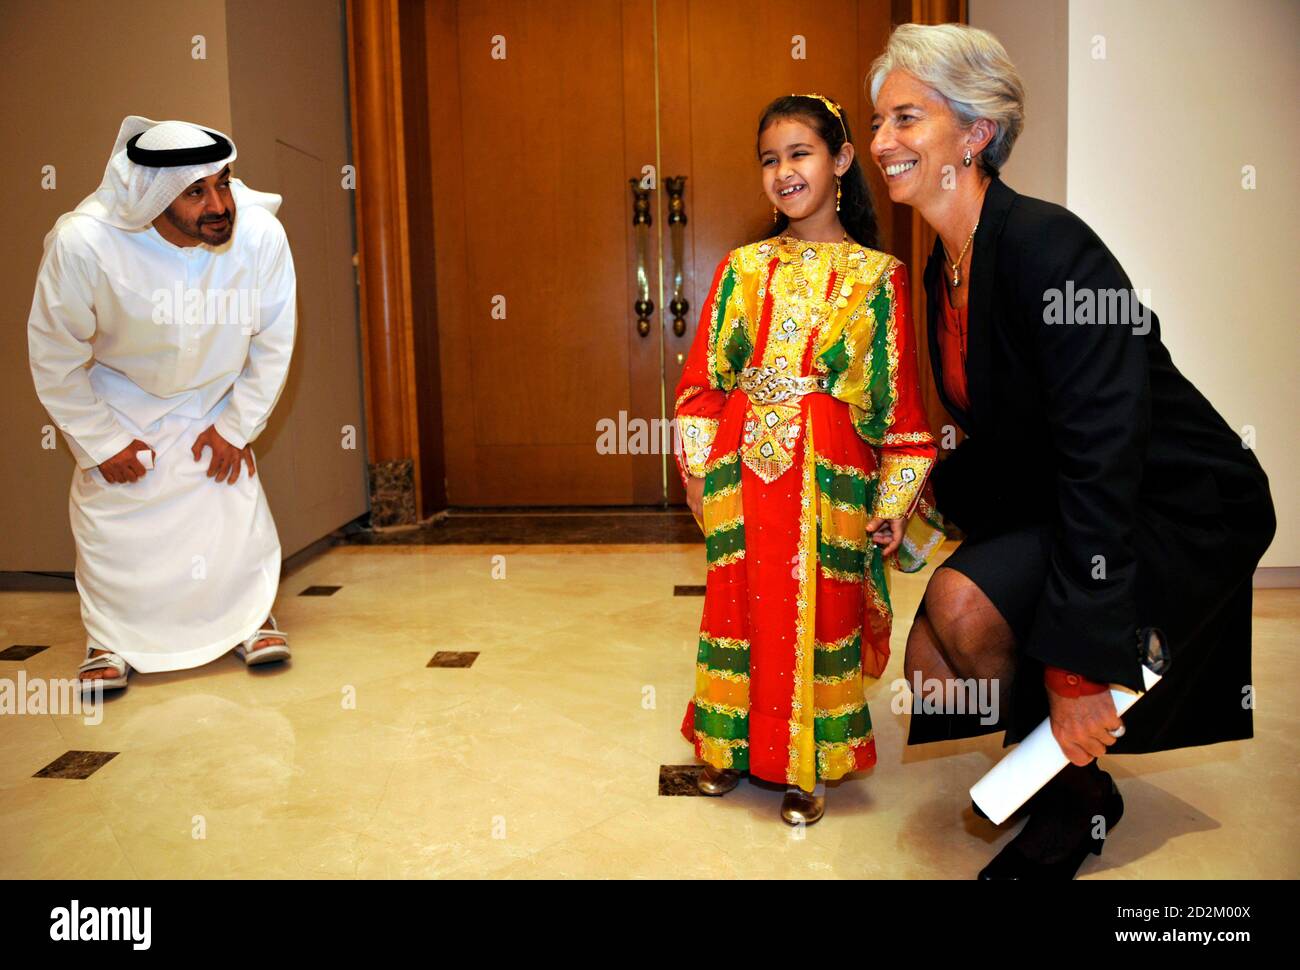 Abu Dhabi Crown Prince Sheikh Mohammed Bin Zayed Al Nahyan encourages his  daughter Princess Hassa (C) as she poses for photographers with France's  Finance Minister Christine Lagarde at a cultural exhibition in